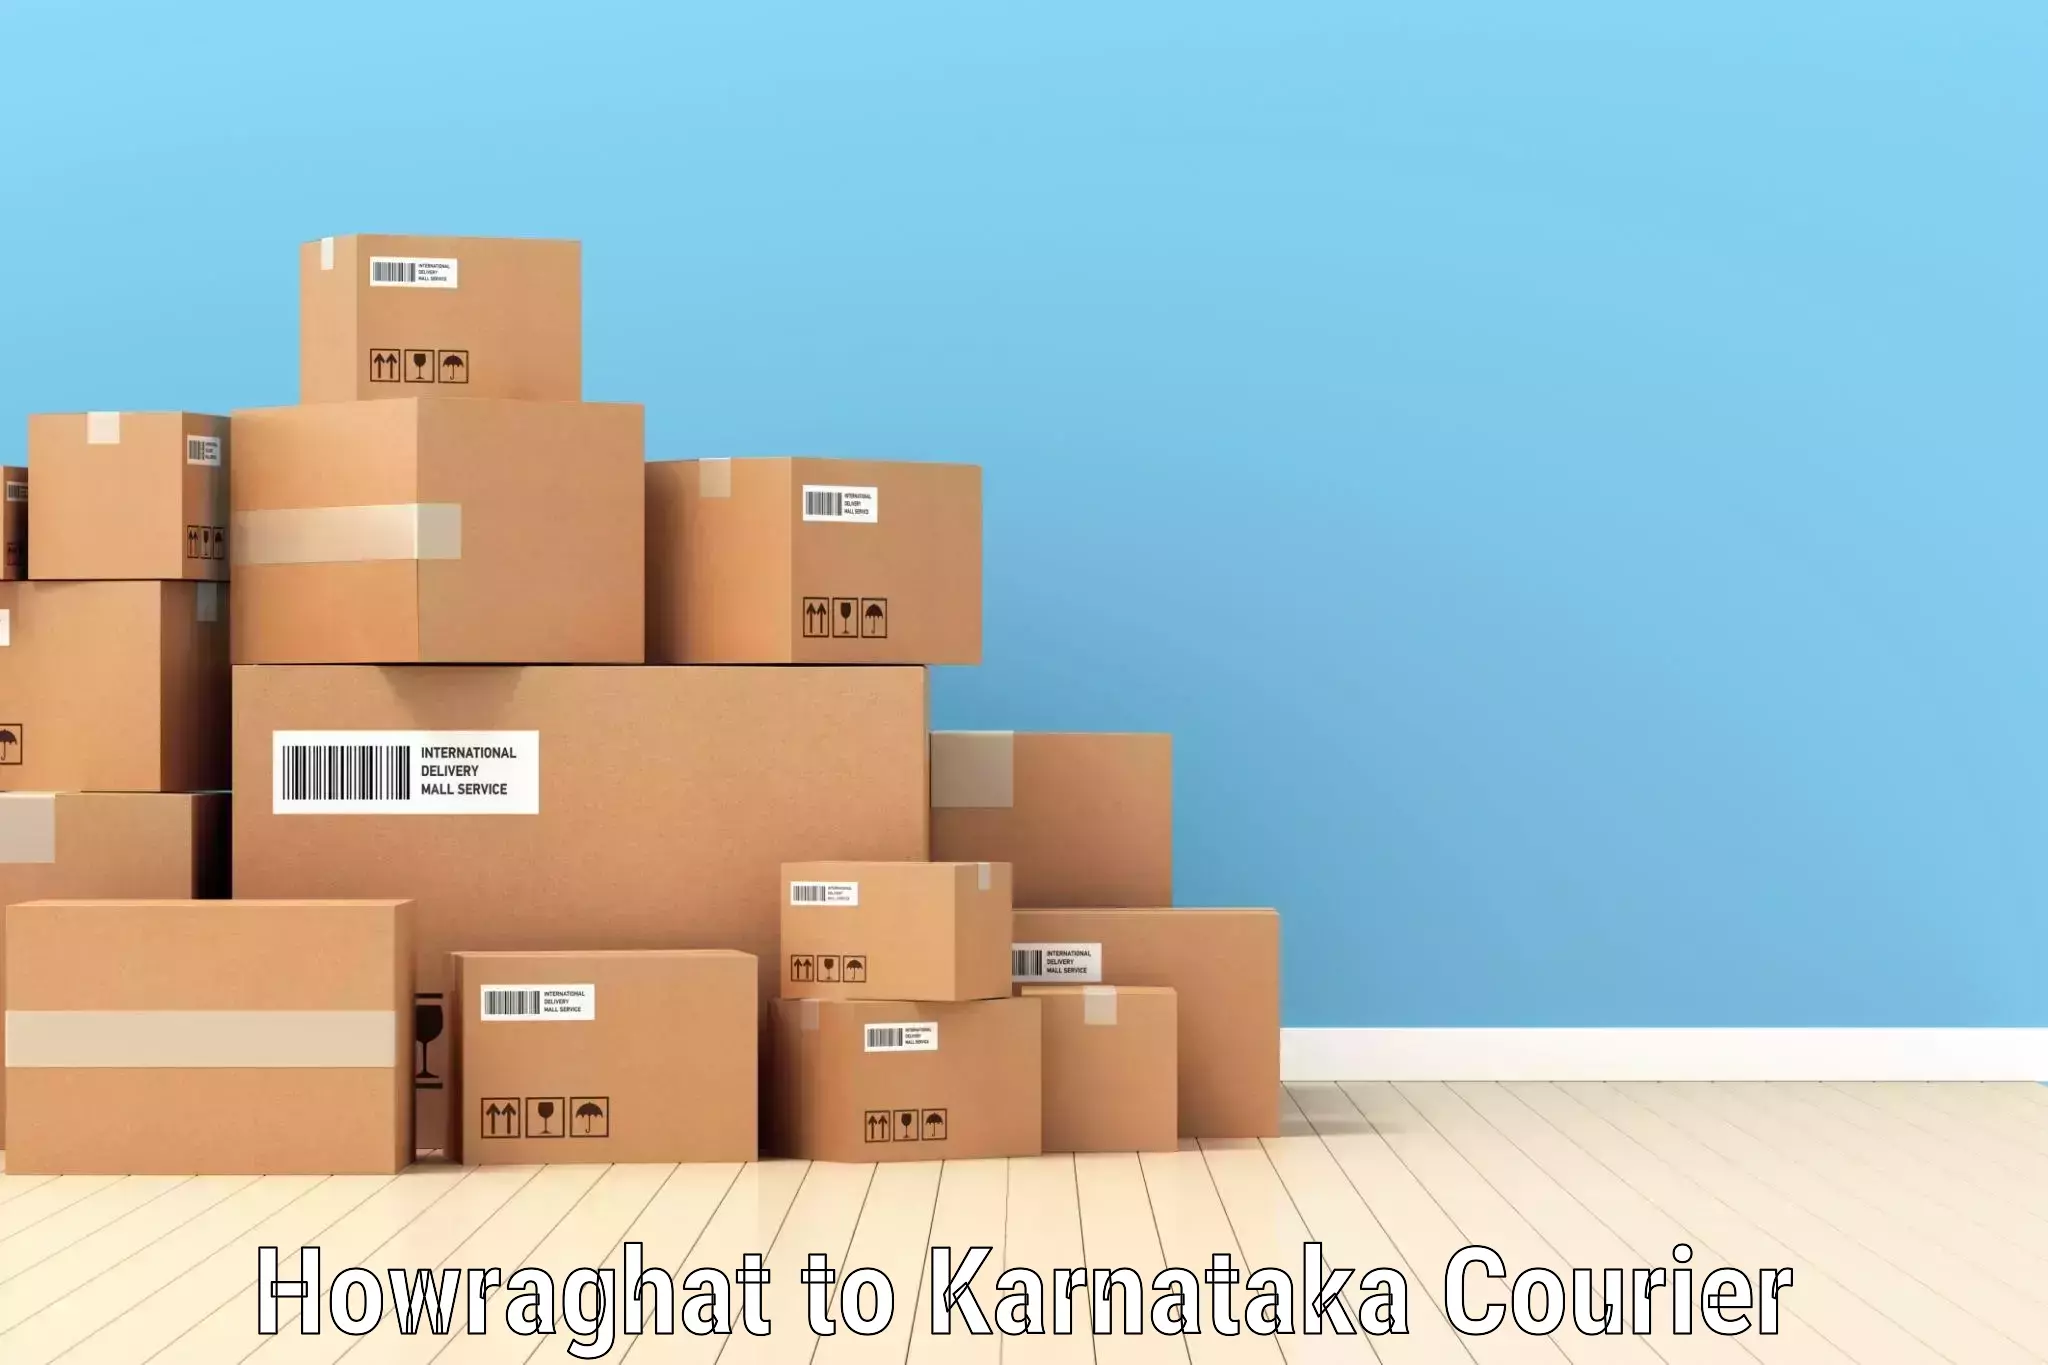 Courier membership Howraghat to Mangalore Port